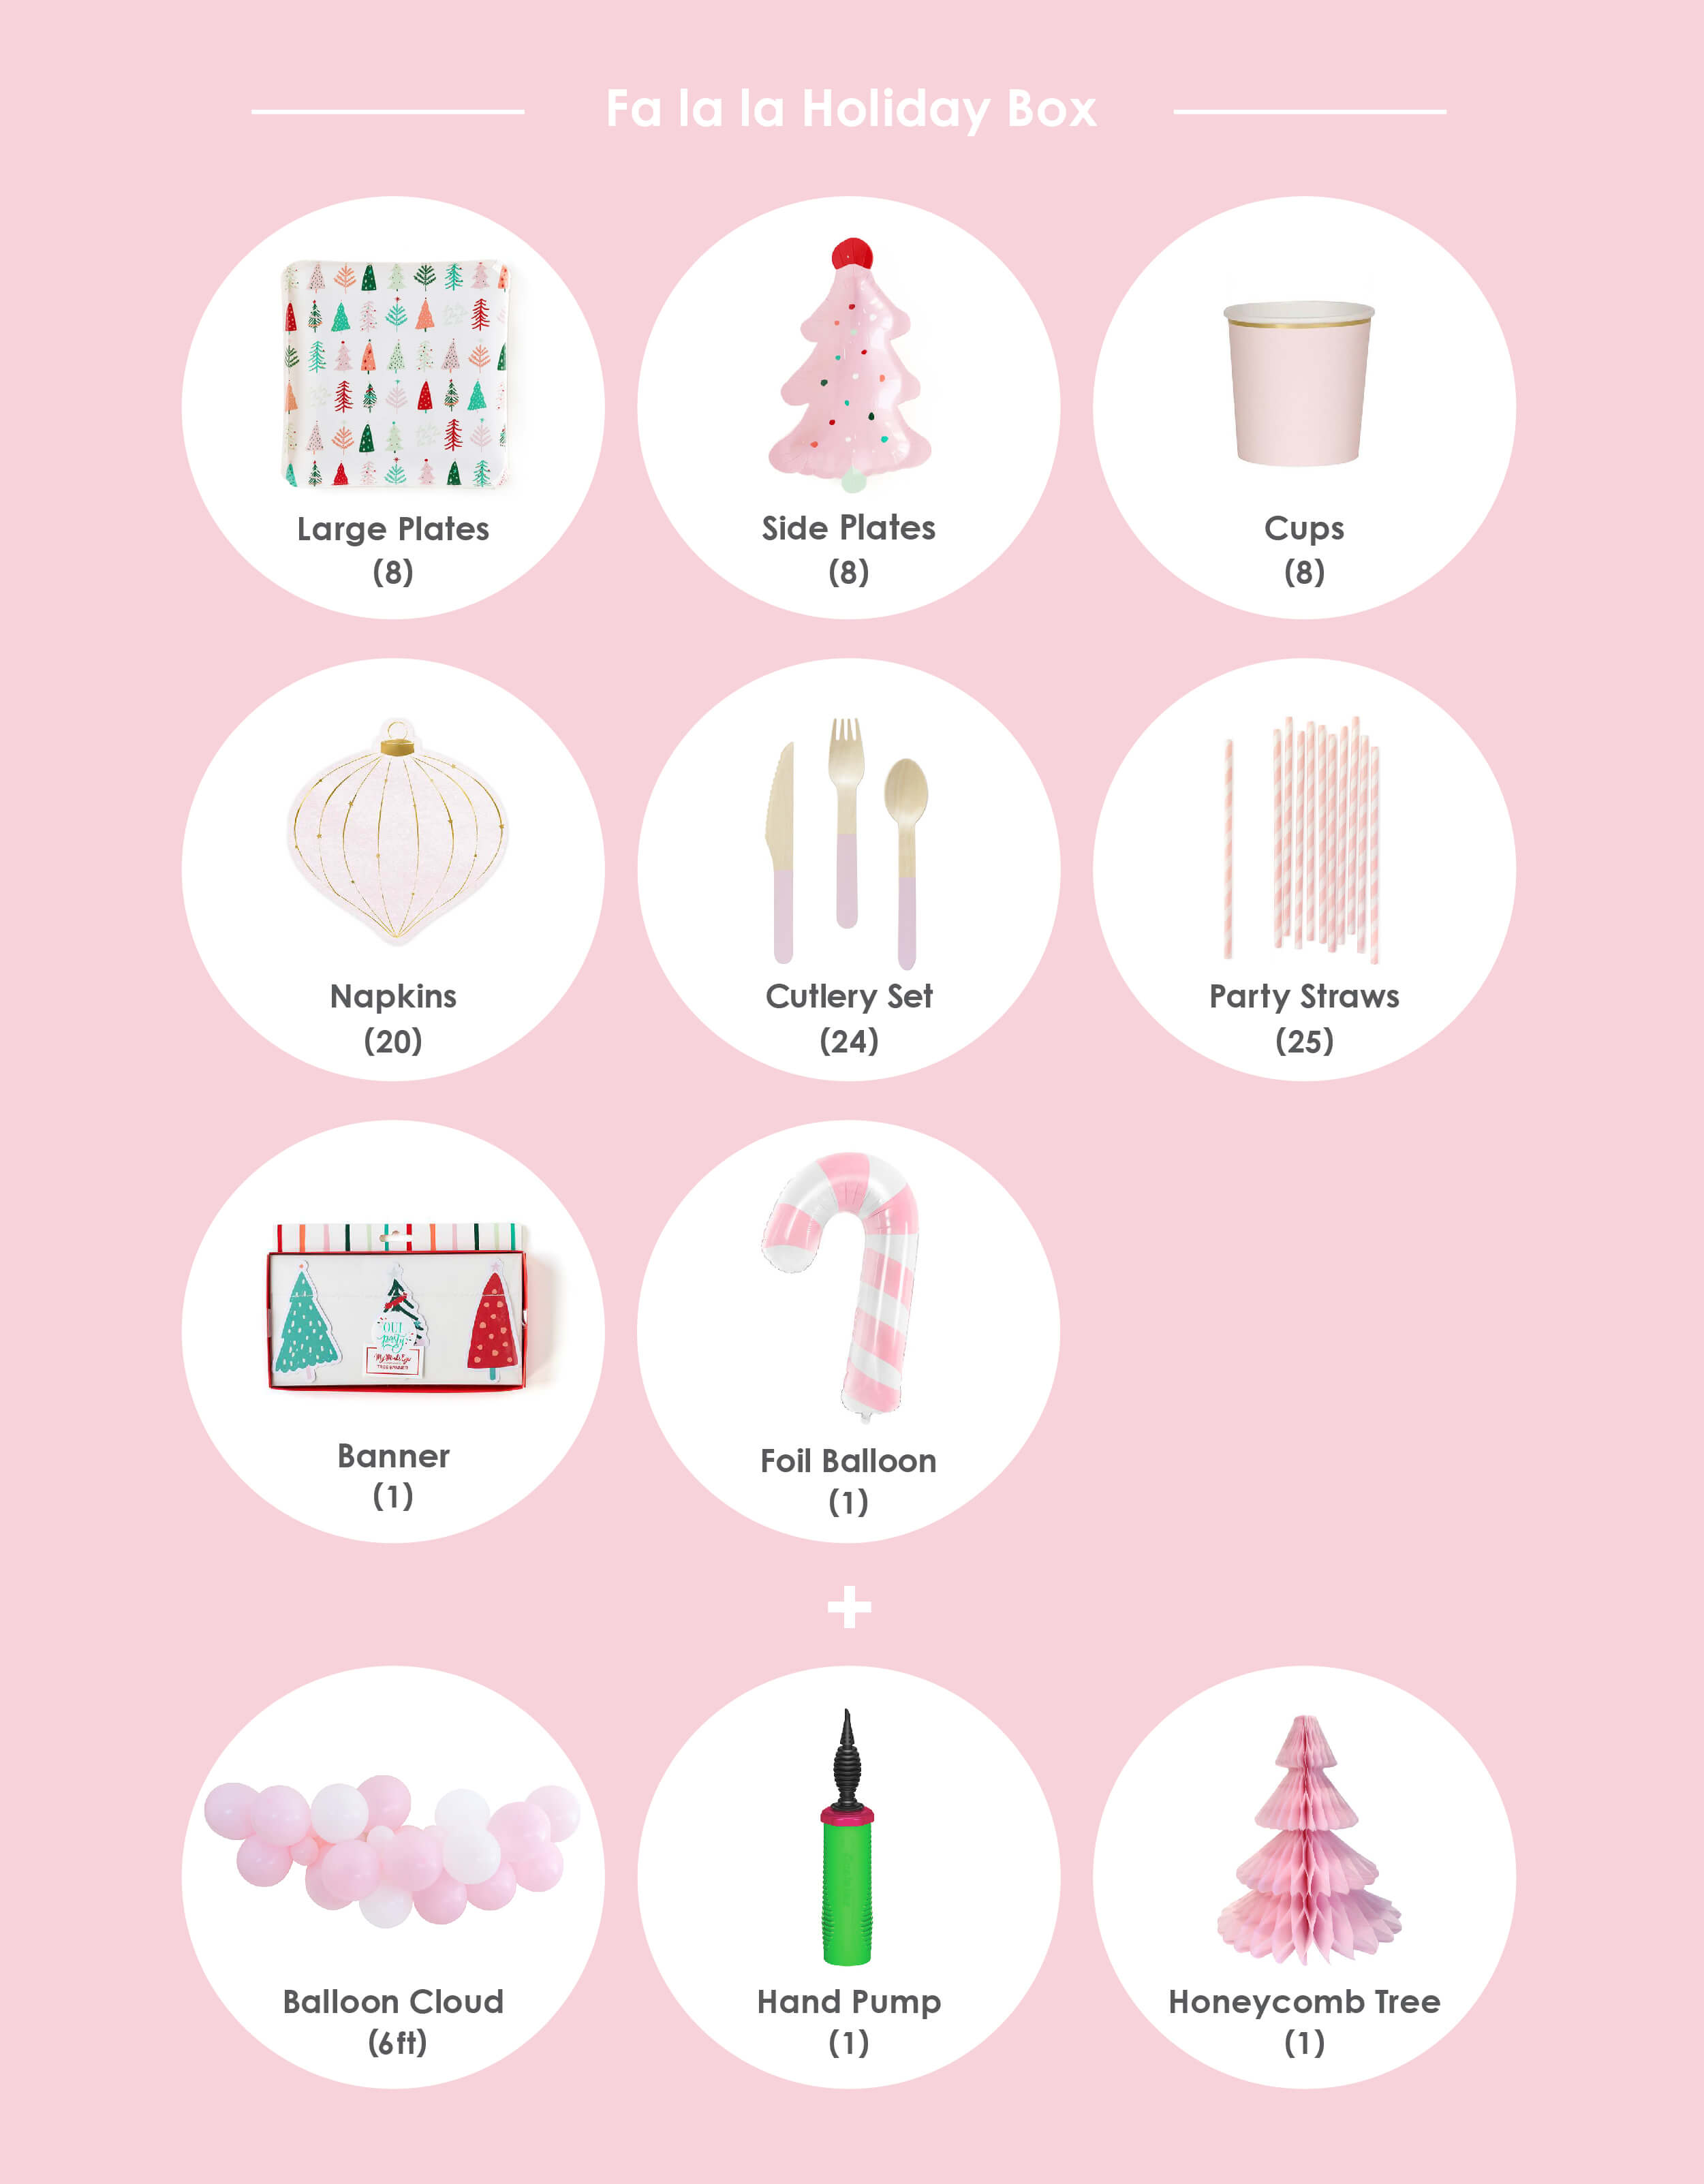 Momo Party 2020 Holiday party box - Christmas Falala Holiday Box list included: Fa La La Christmas Tree Plates, Fa La La Pink Frosting Christmas Tree Plates, Pale Pink Tumbler Cups, Christmas Ornament Napkins, Soft Pink Wooden Cutlery Set, Pastel Pink Striped Party Straws, Fa La La Christmas Tree Banner, Pink Candy Cane Foil Balloon, a La La 6-foot Balloon Cloud Kit and Medium Light Pink Honeycomb Paper Christmas Tree. High end party supply for a pastel pink christmas holiday party